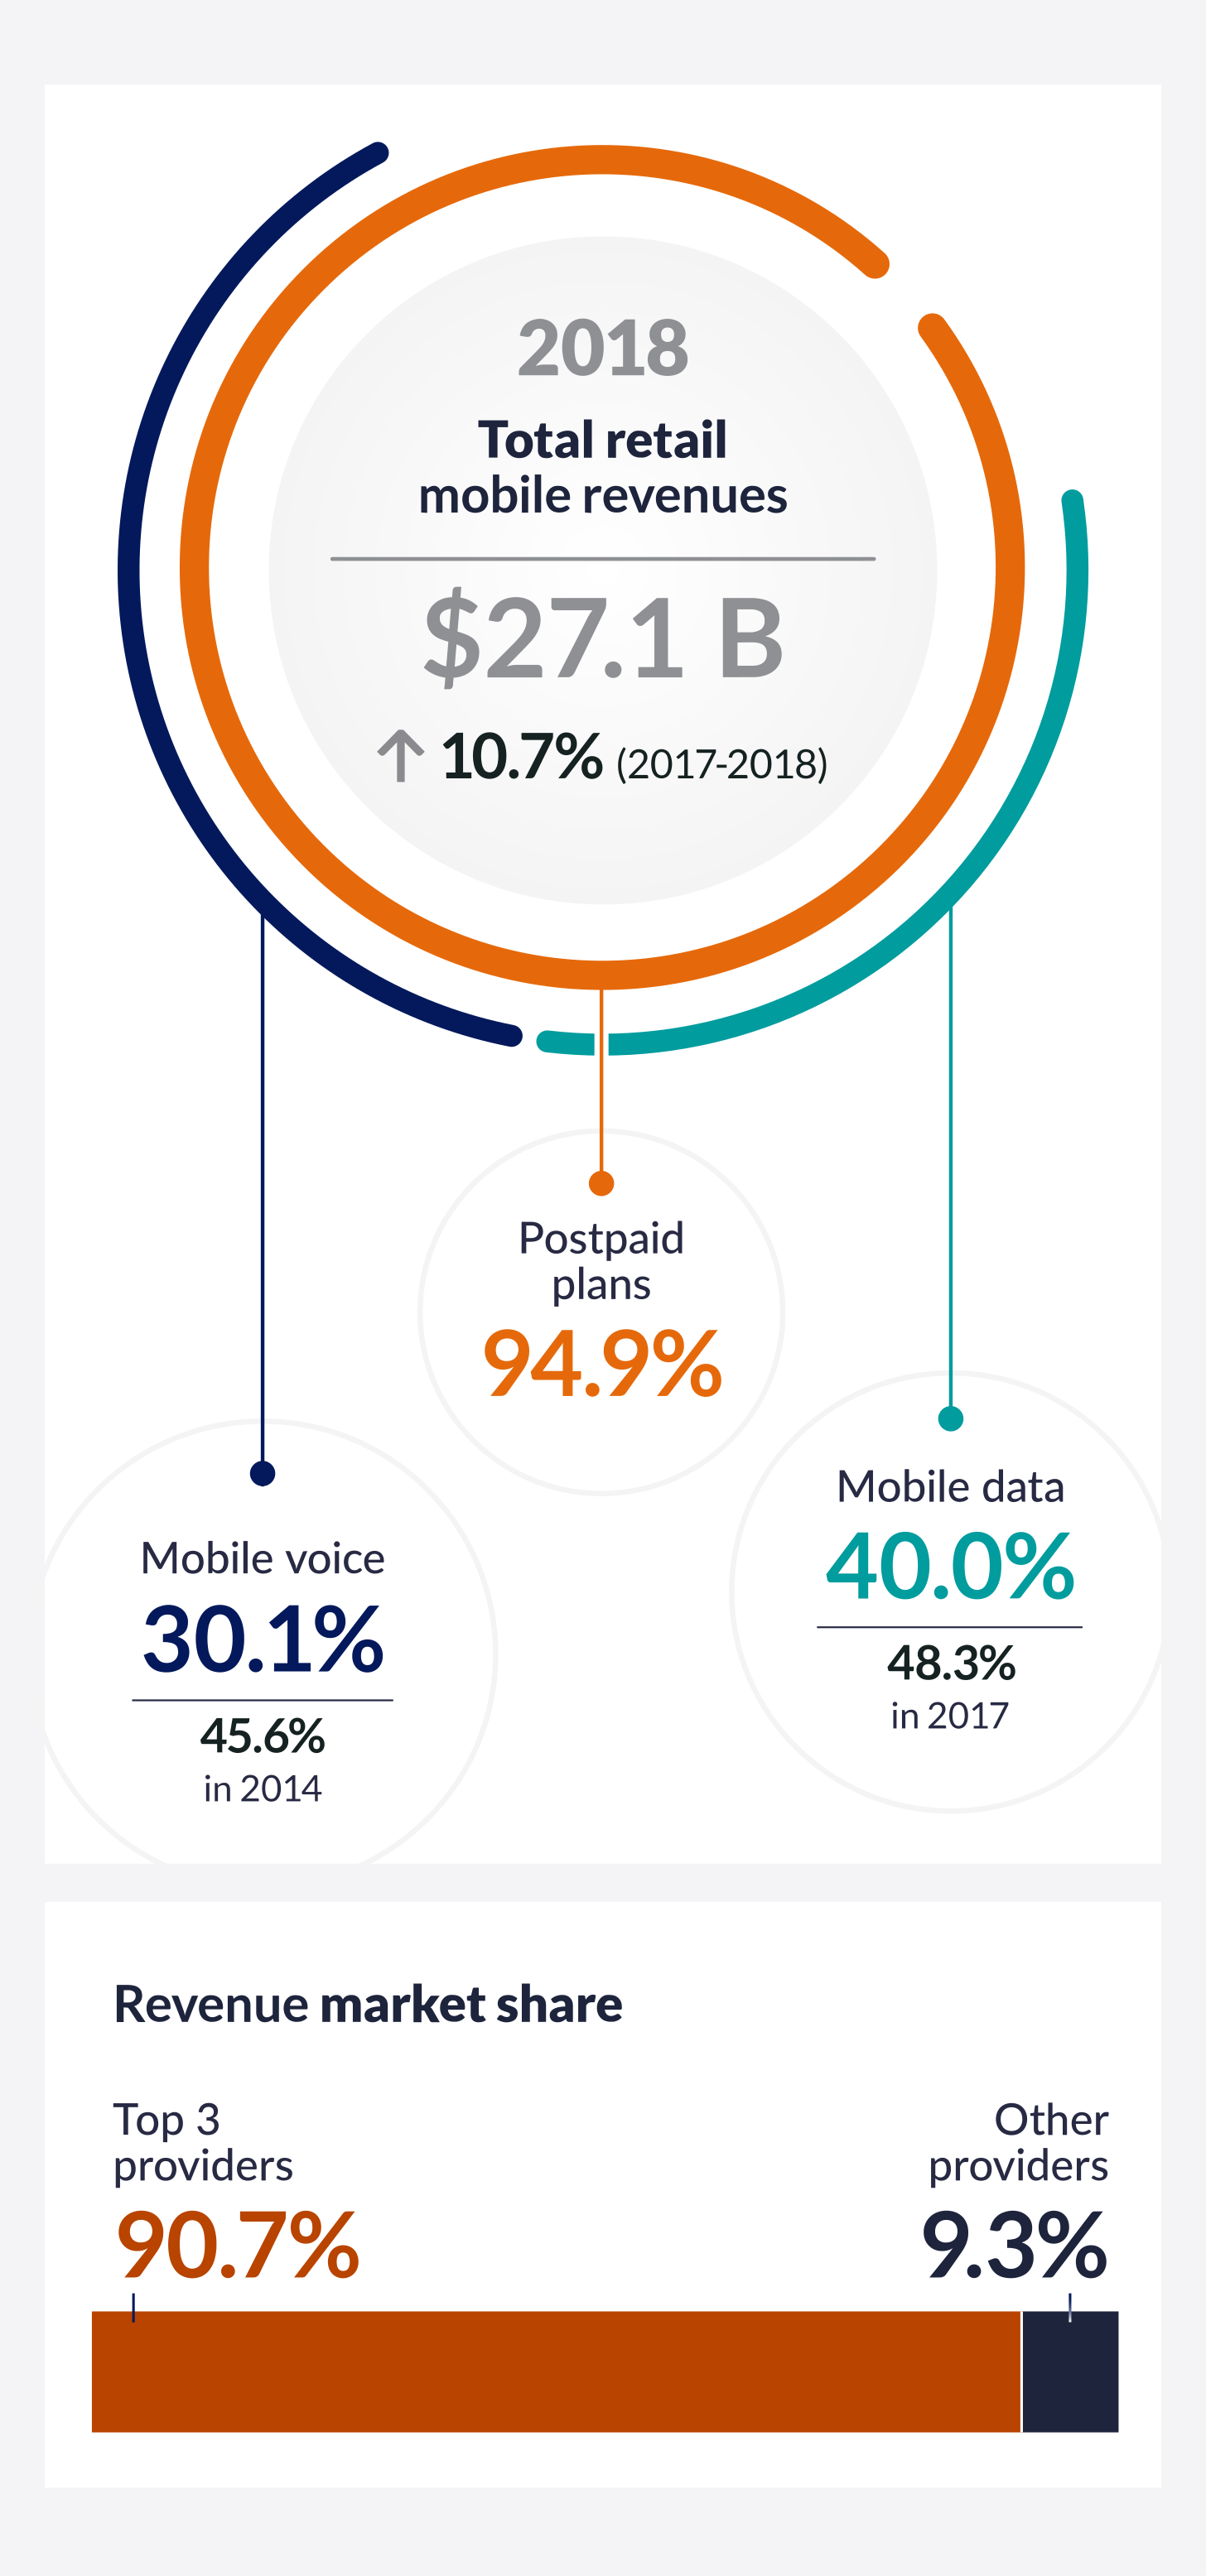 Infographic 10.2 Highlights of the retail mobile revenues, 2018